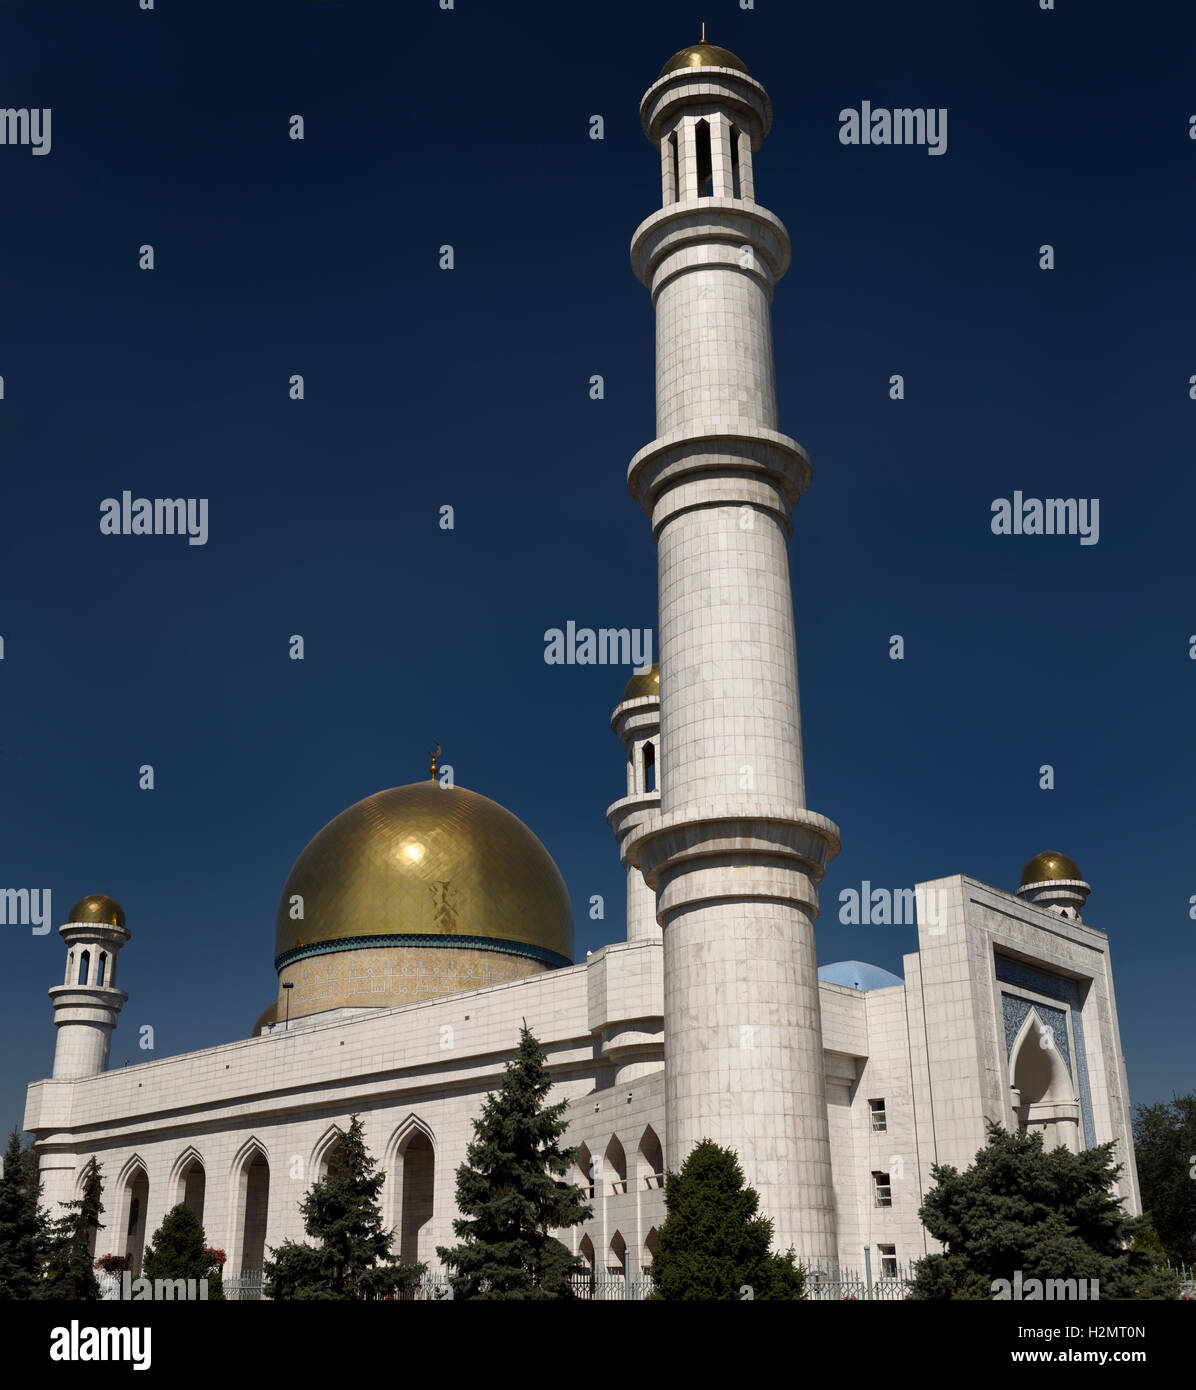 Golden dome and minaret of Central Mosque in Almaty Kazakhstan Stock Photo